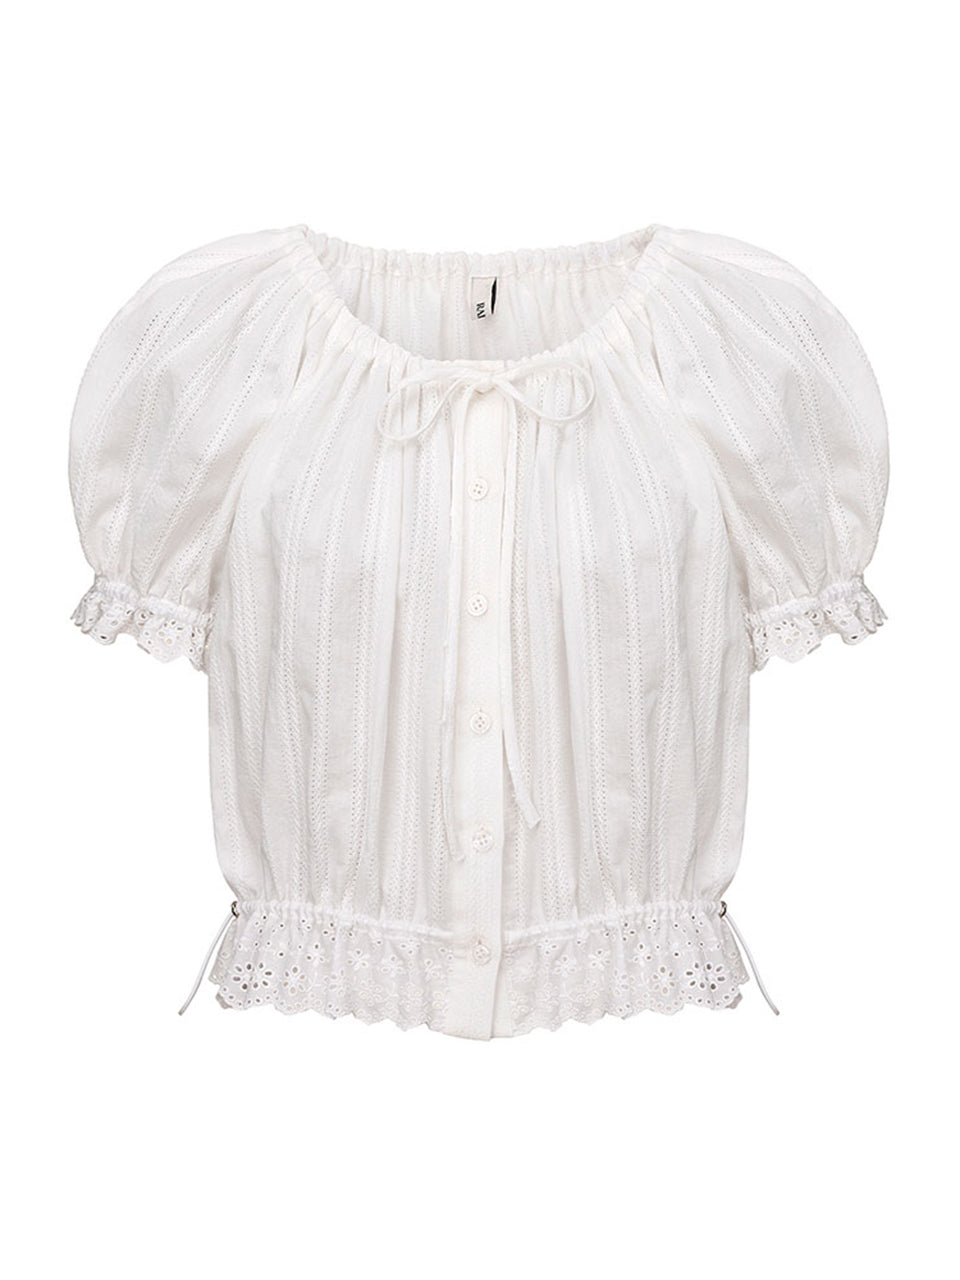 Lace String Blouse in White